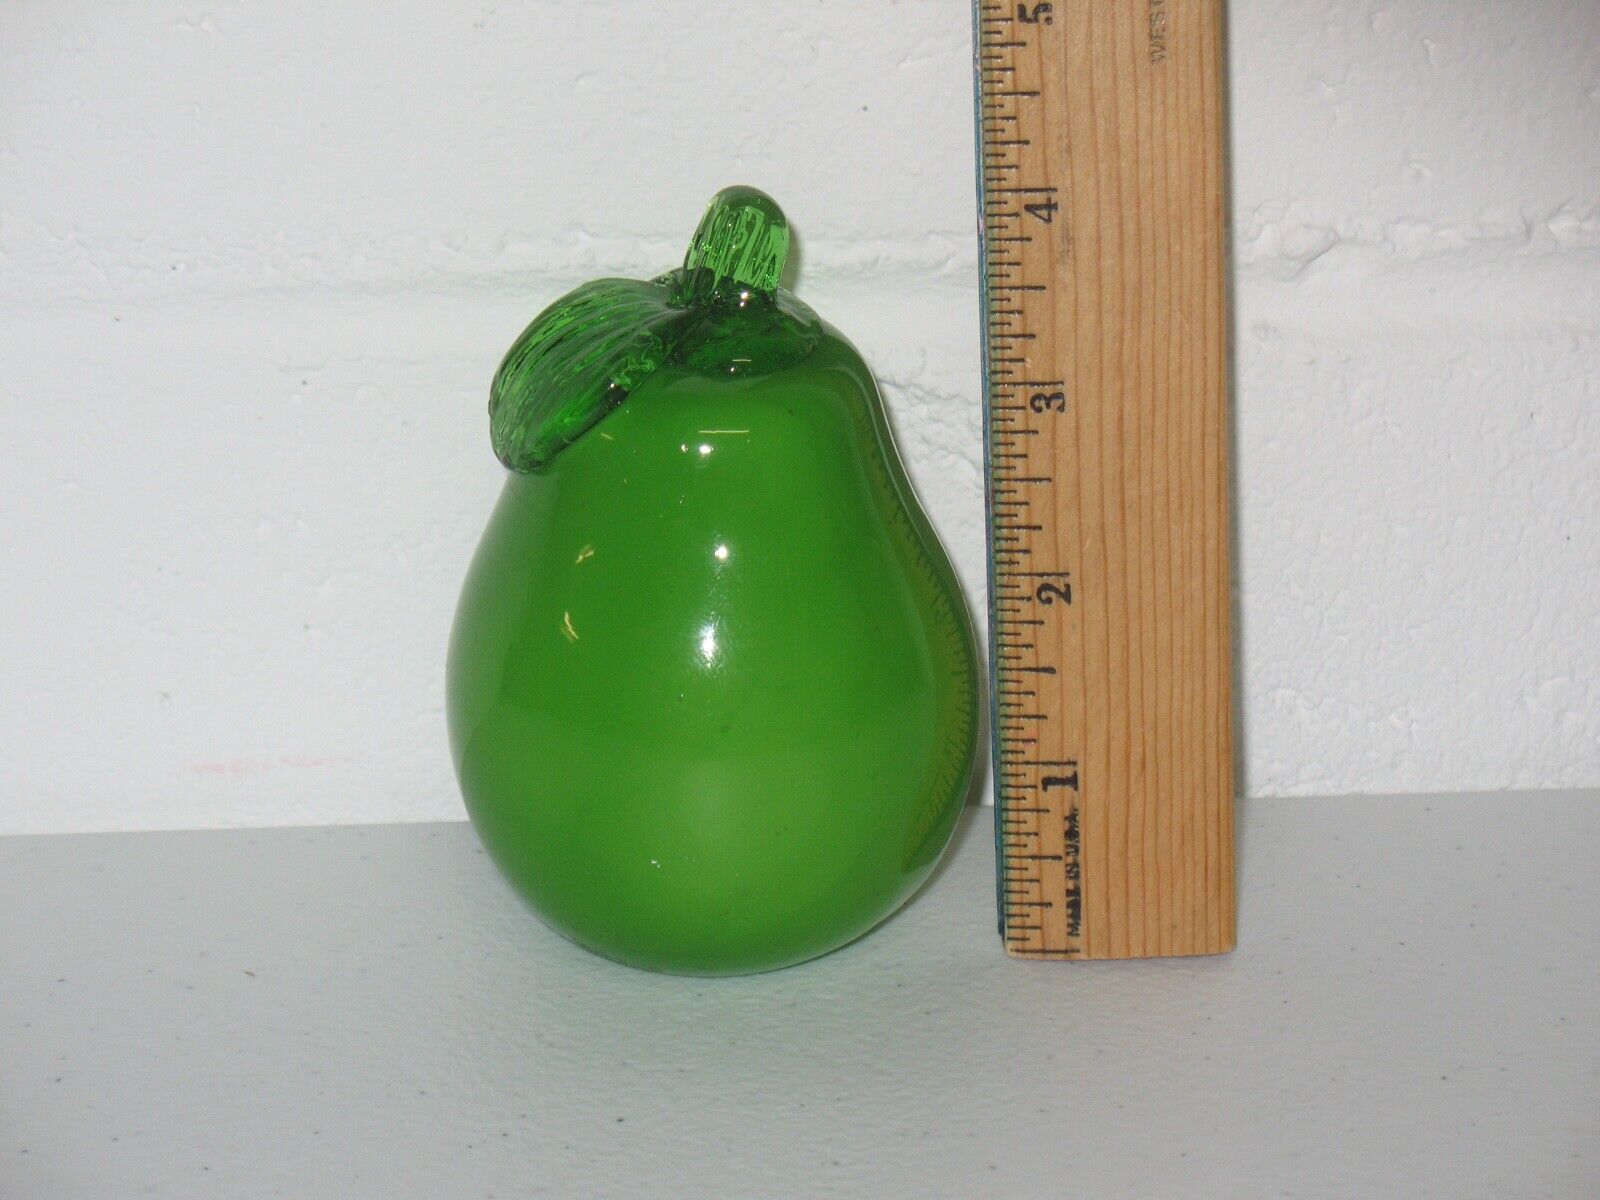 Murano Art Style Vintage Glass Fruit Green Pear Unbranded Retro MCM Antique - £10.75 GBP